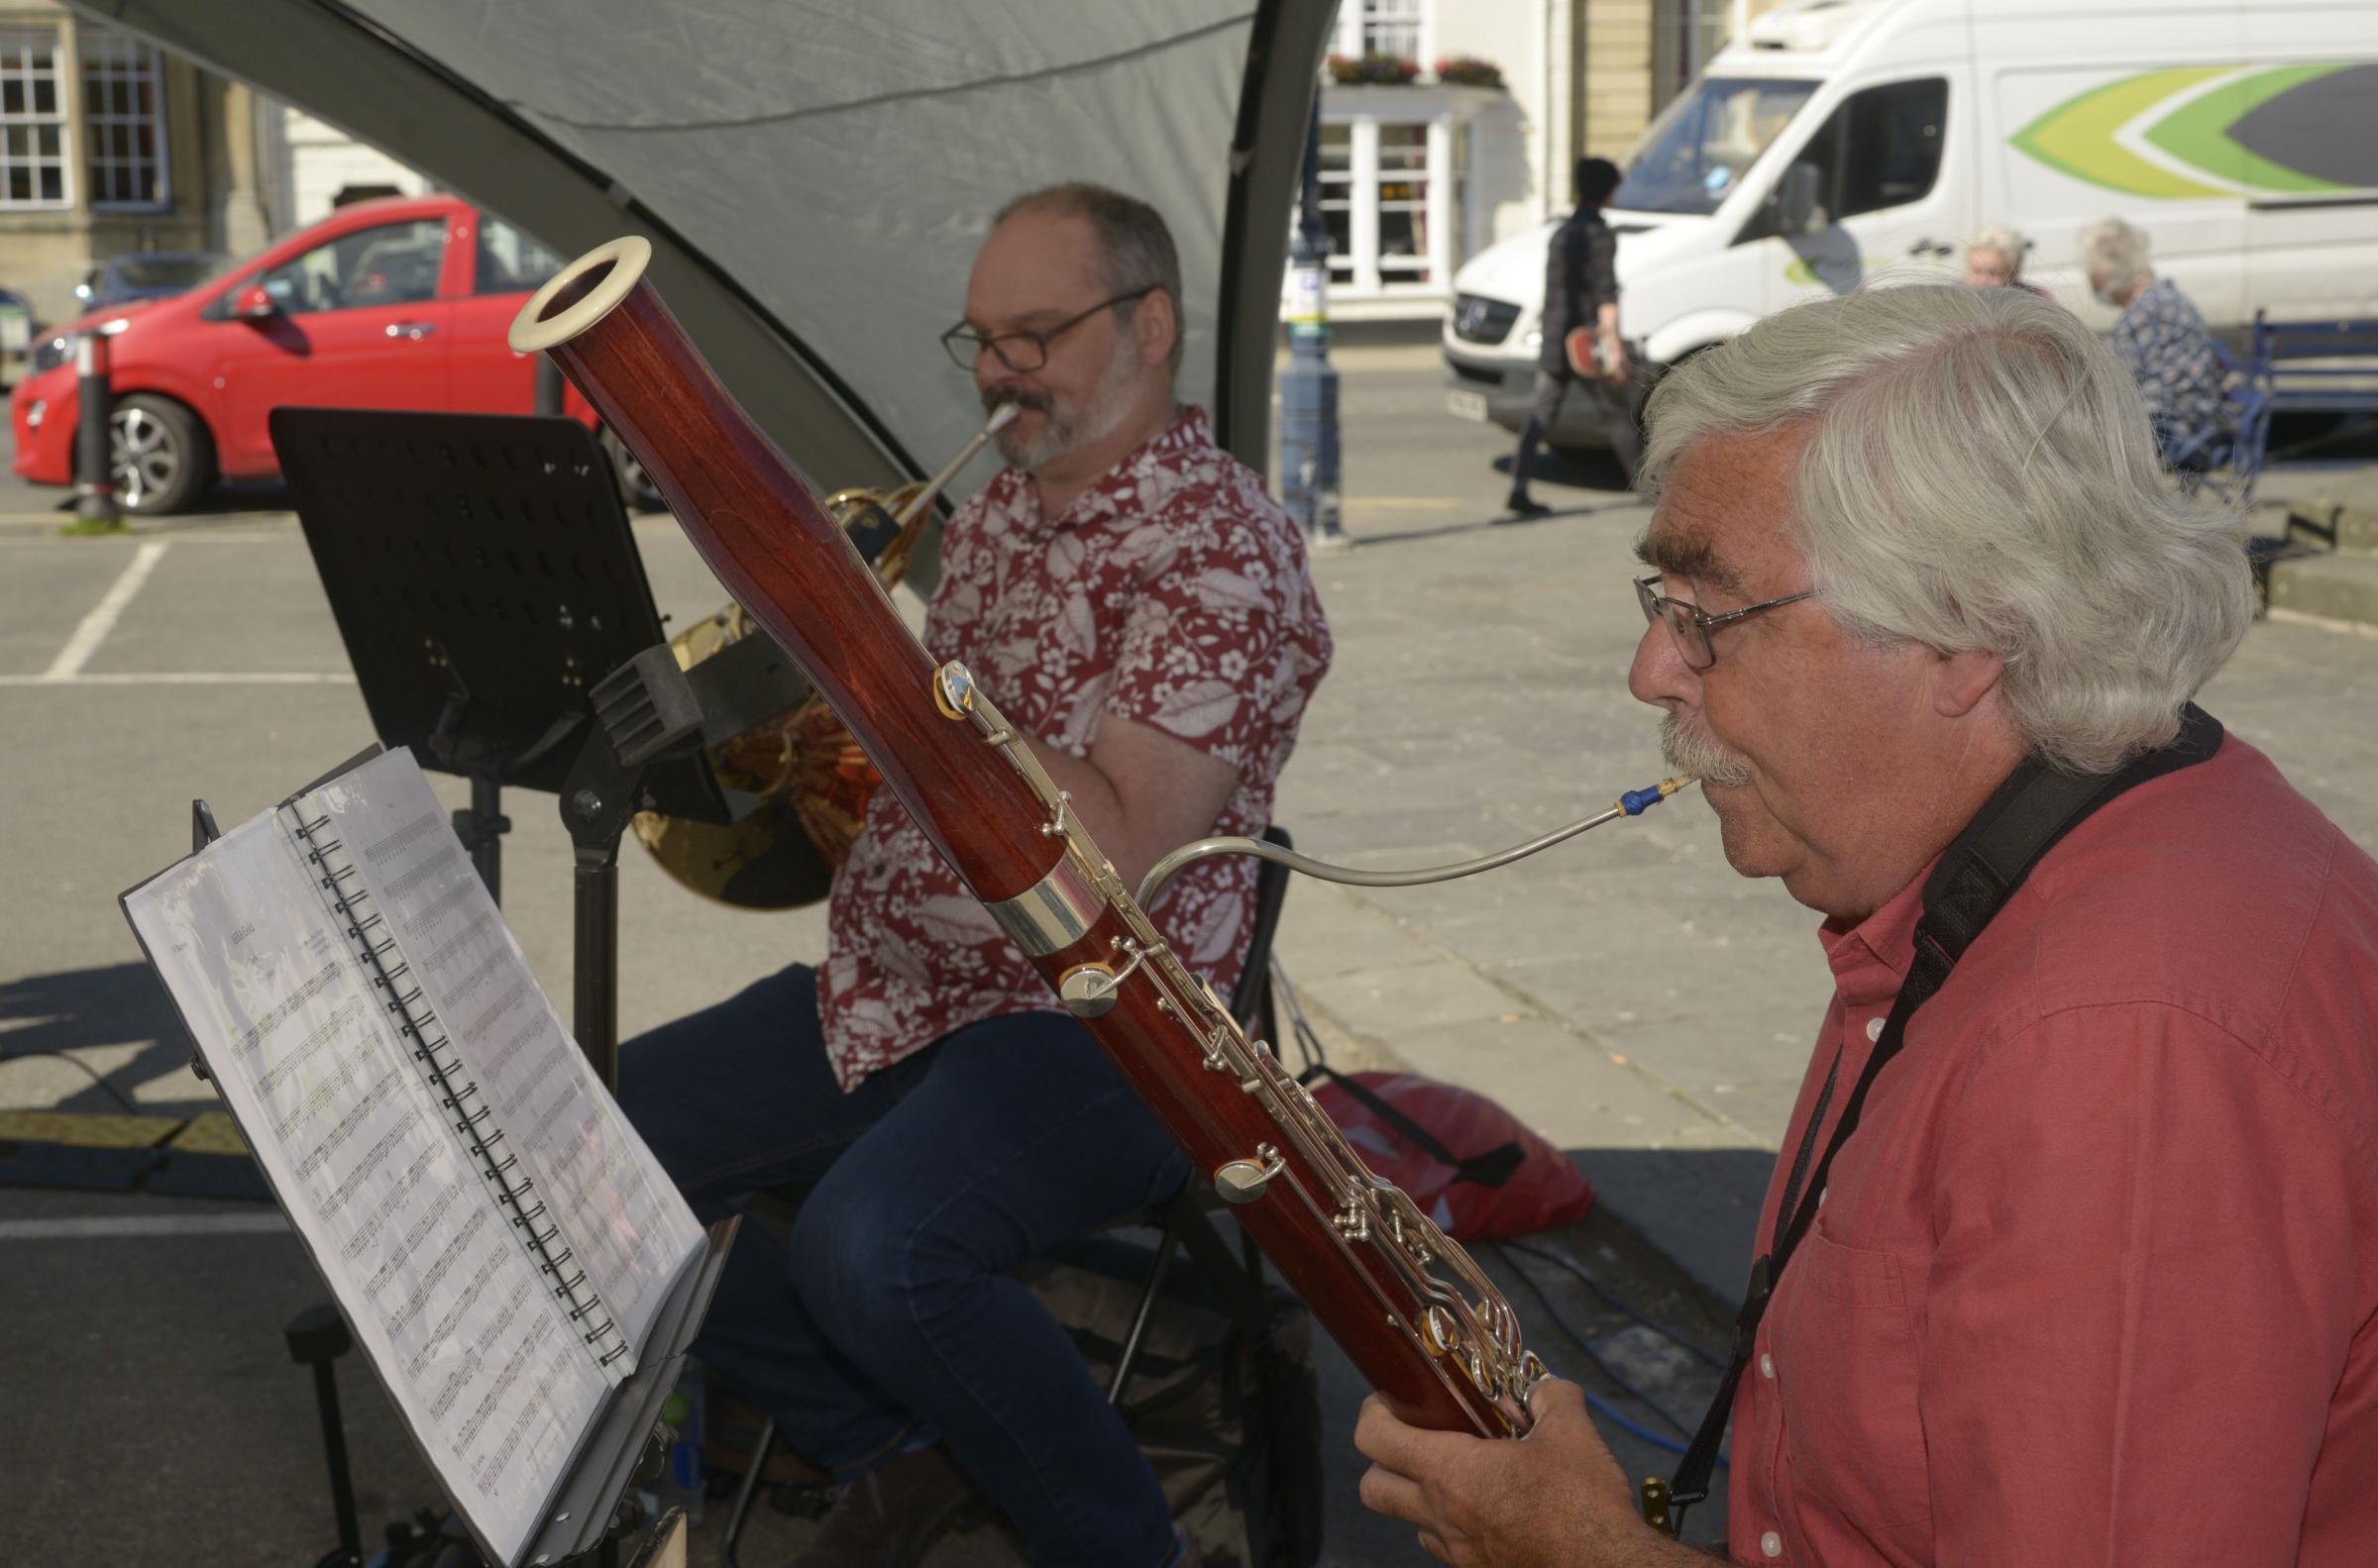 indie Day Devizes Alan Braunton bassoon ‘ of Take five’ at the opens the Indie Day in Devizes Market Place Photo Trevor Porter 67436 3